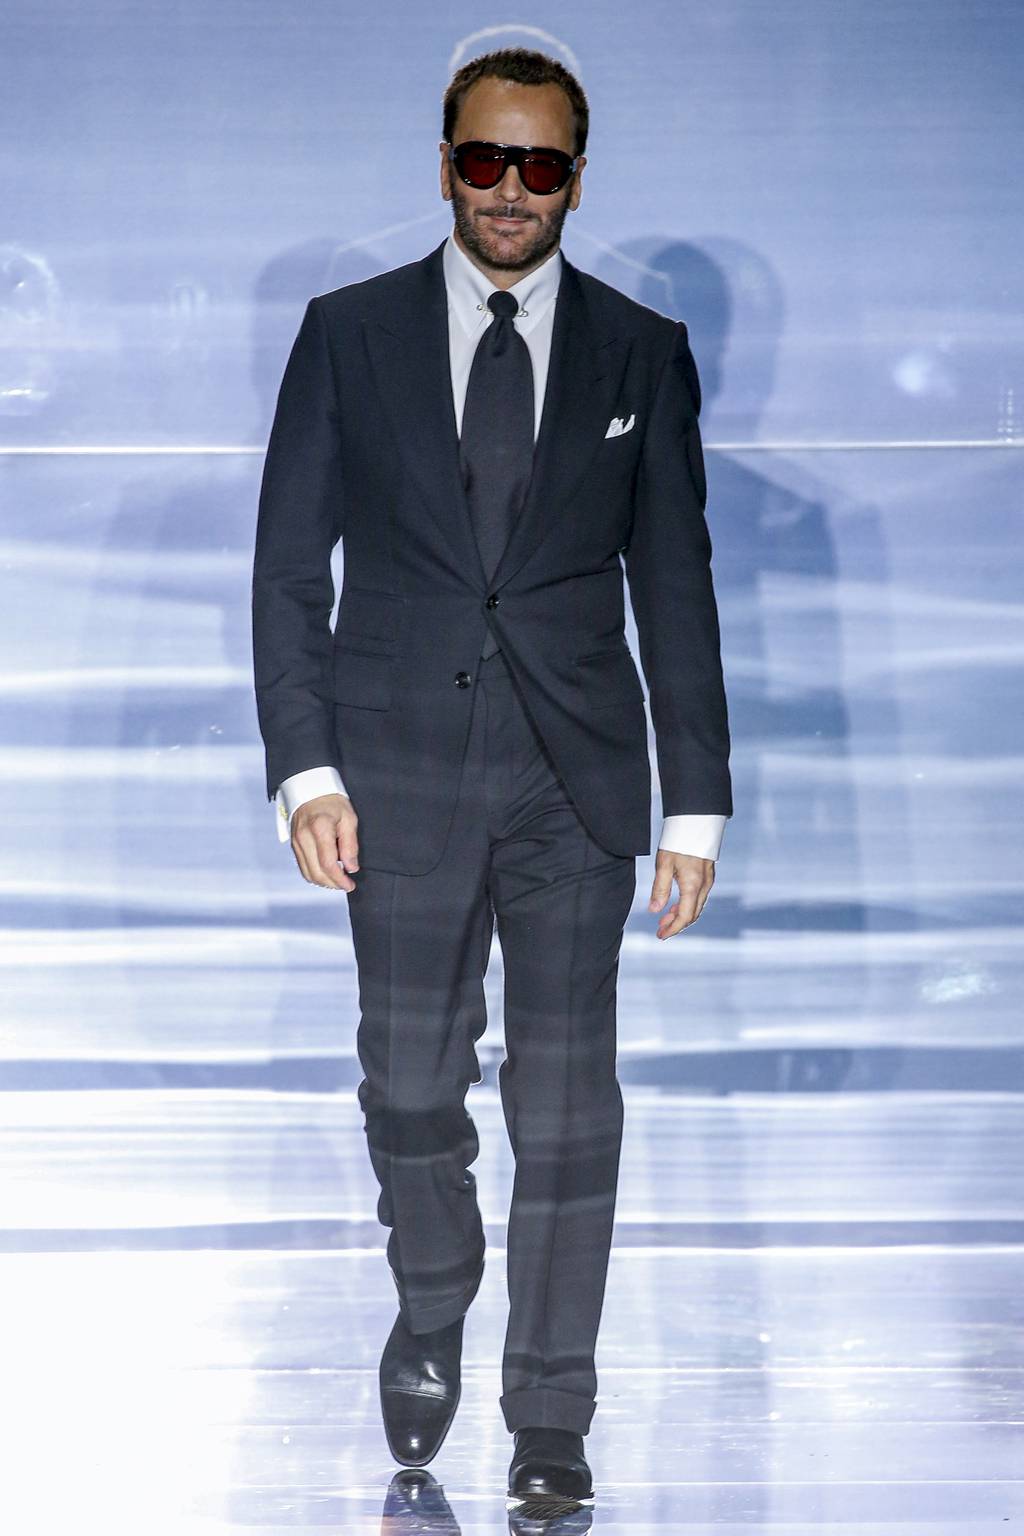 Tom Ford the designer on the runway.